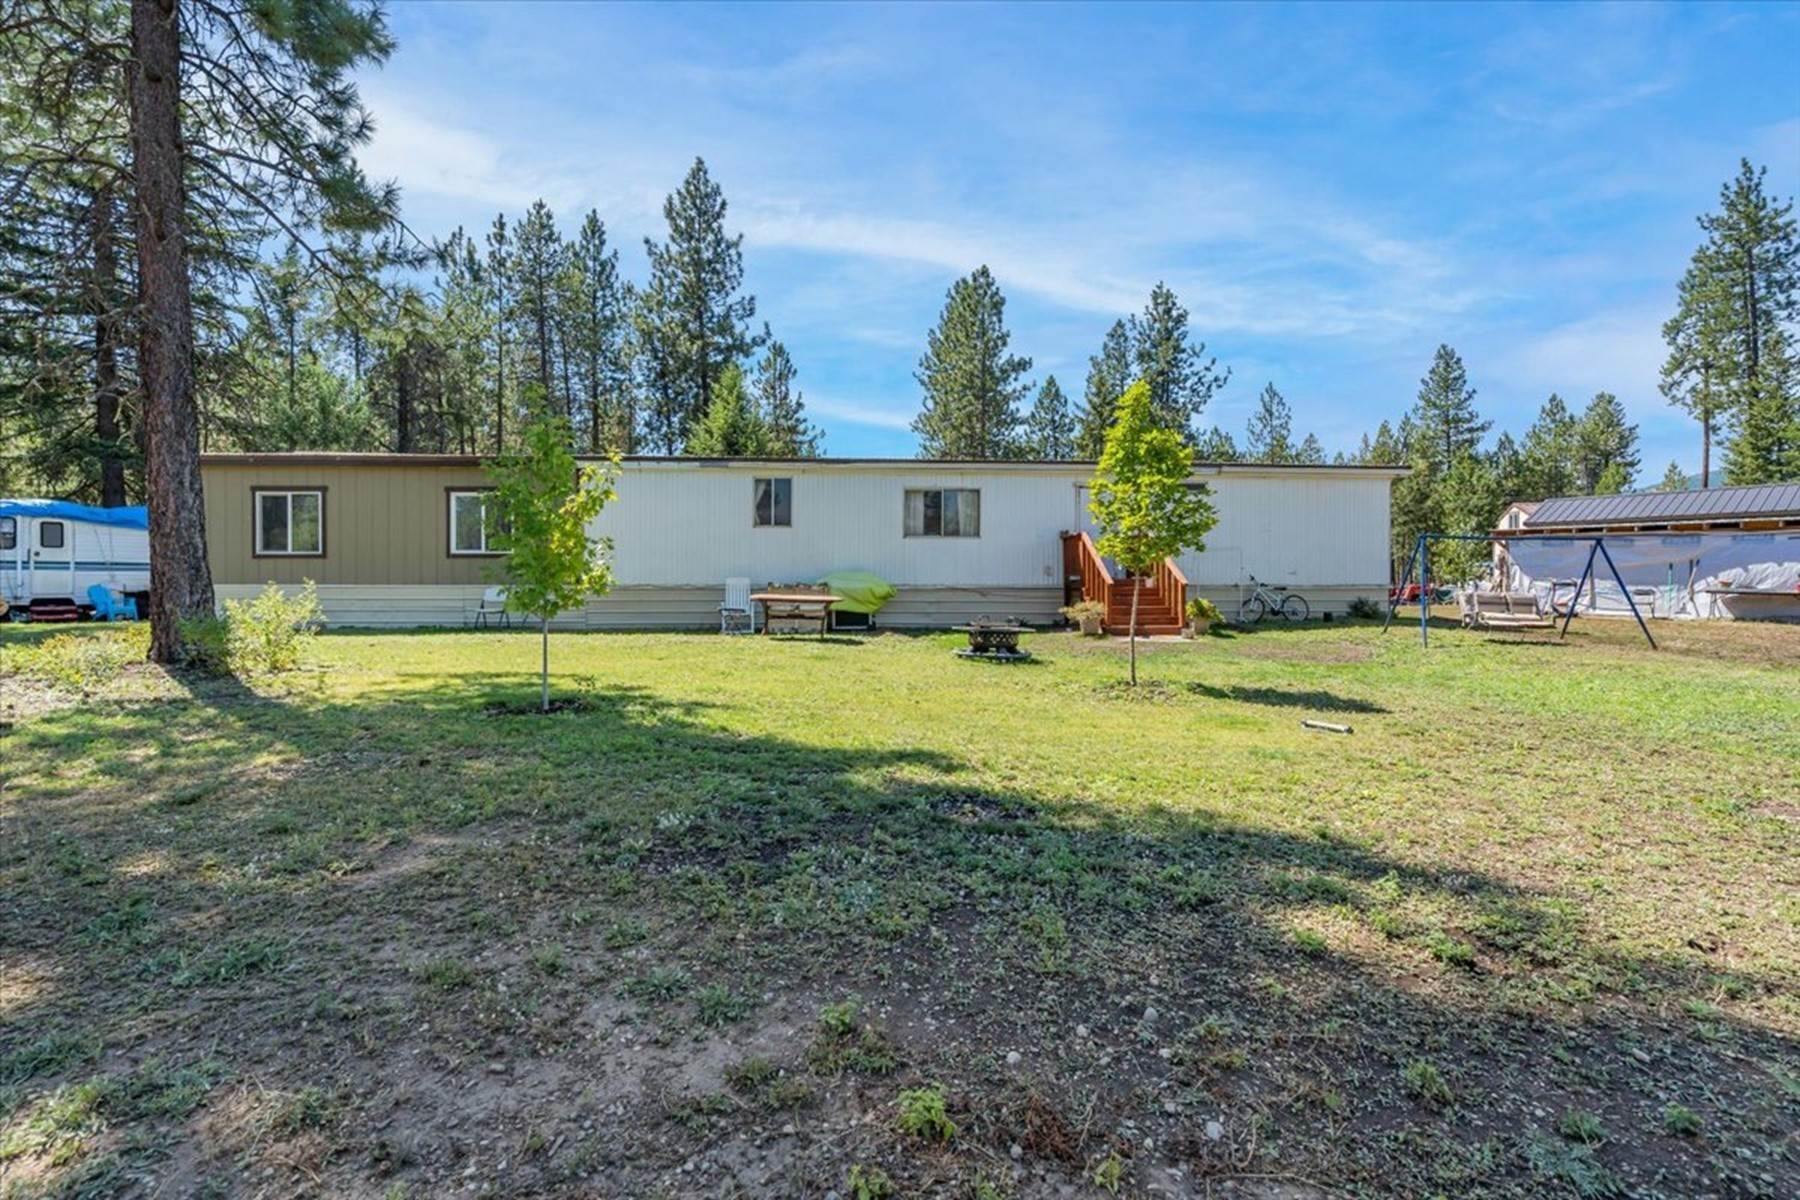 28. Property for Sale at 89 Outback Ct 237 Outback Ridge Ct Spirit Lake, Idaho 83869 United States